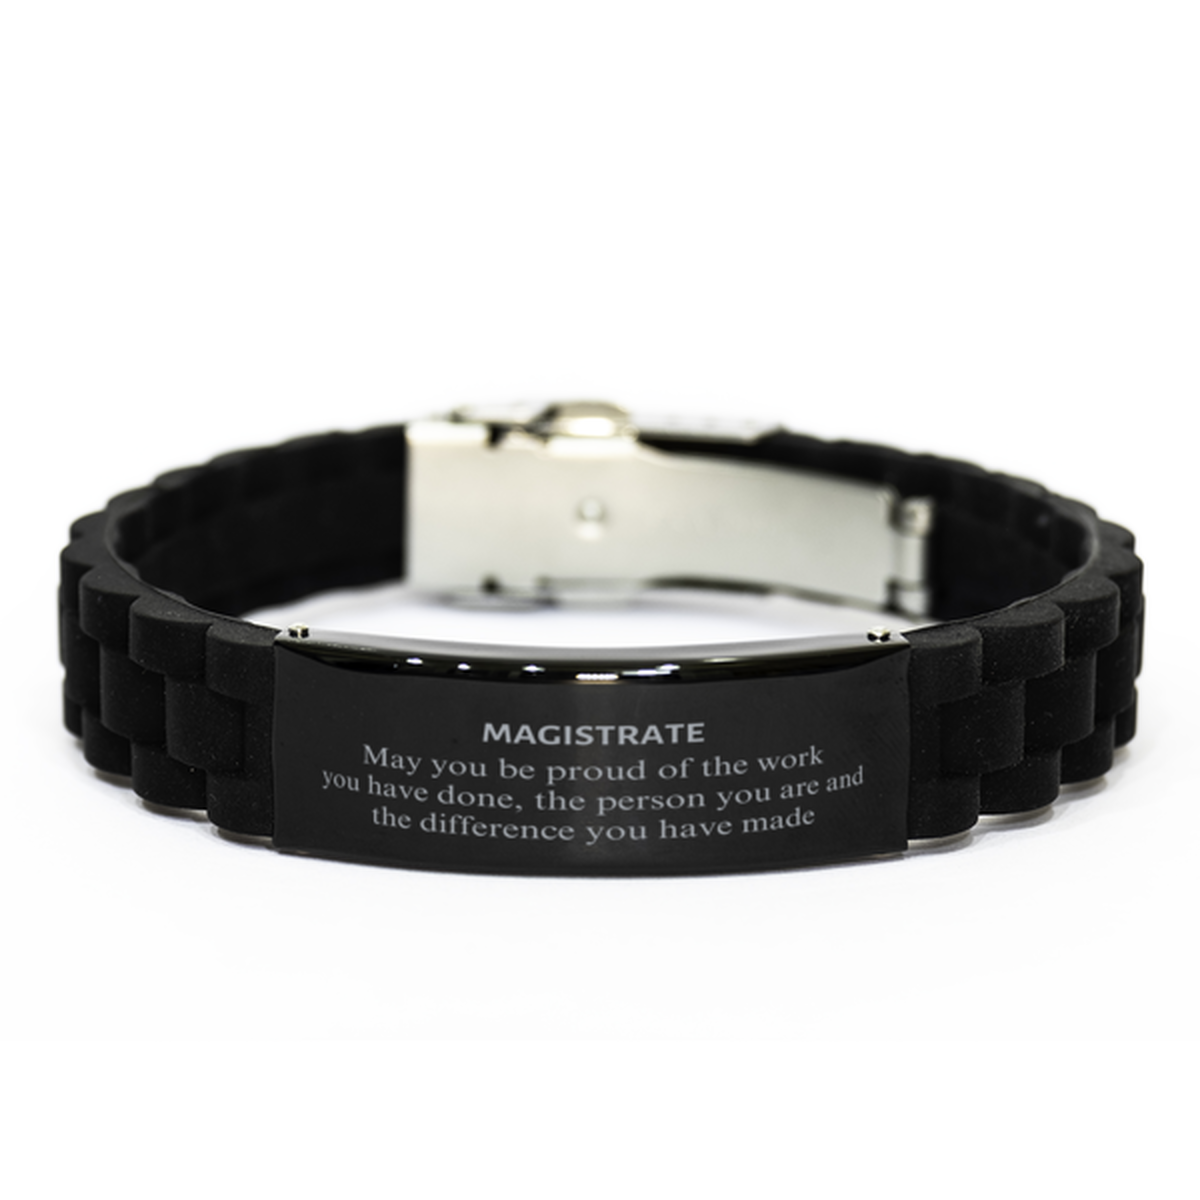 Magistrate May you be proud of the work you have done, Retirement Magistrate Black Glidelock Clasp Bracelet for Colleague Appreciation Gifts Amazing for Magistrate